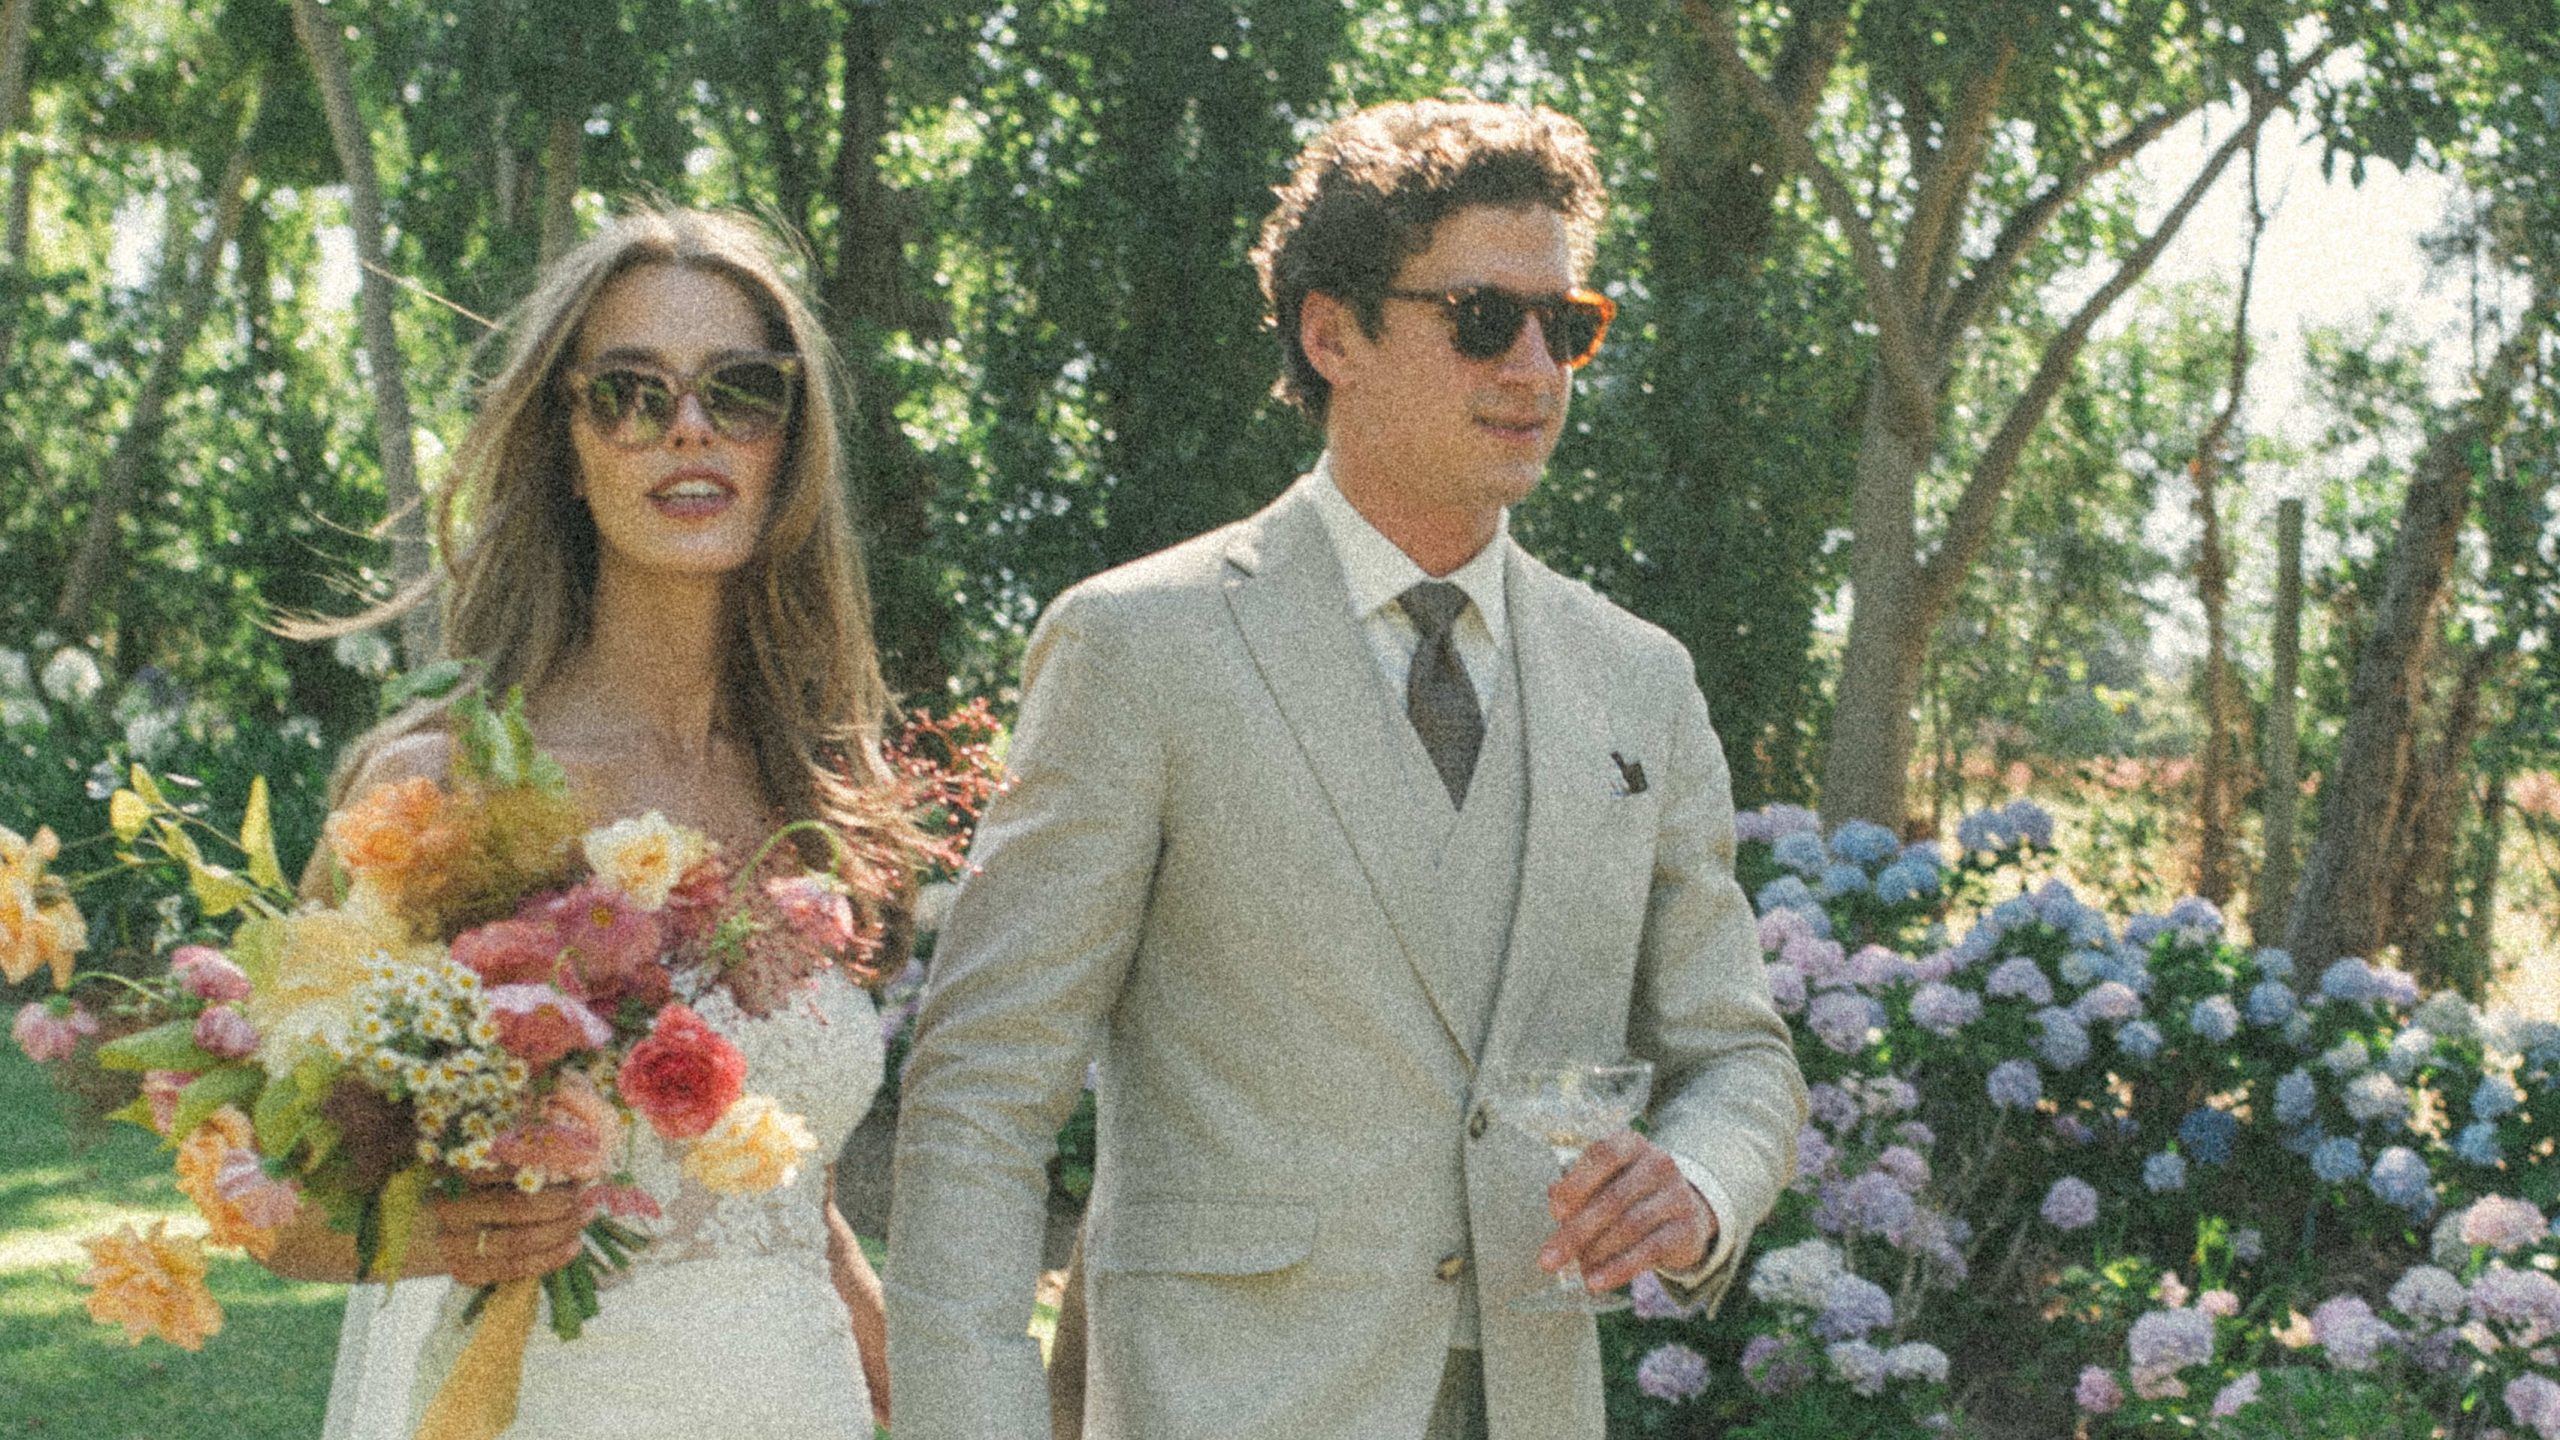 Bride and groom with sunglasses and tailored beige linen suit